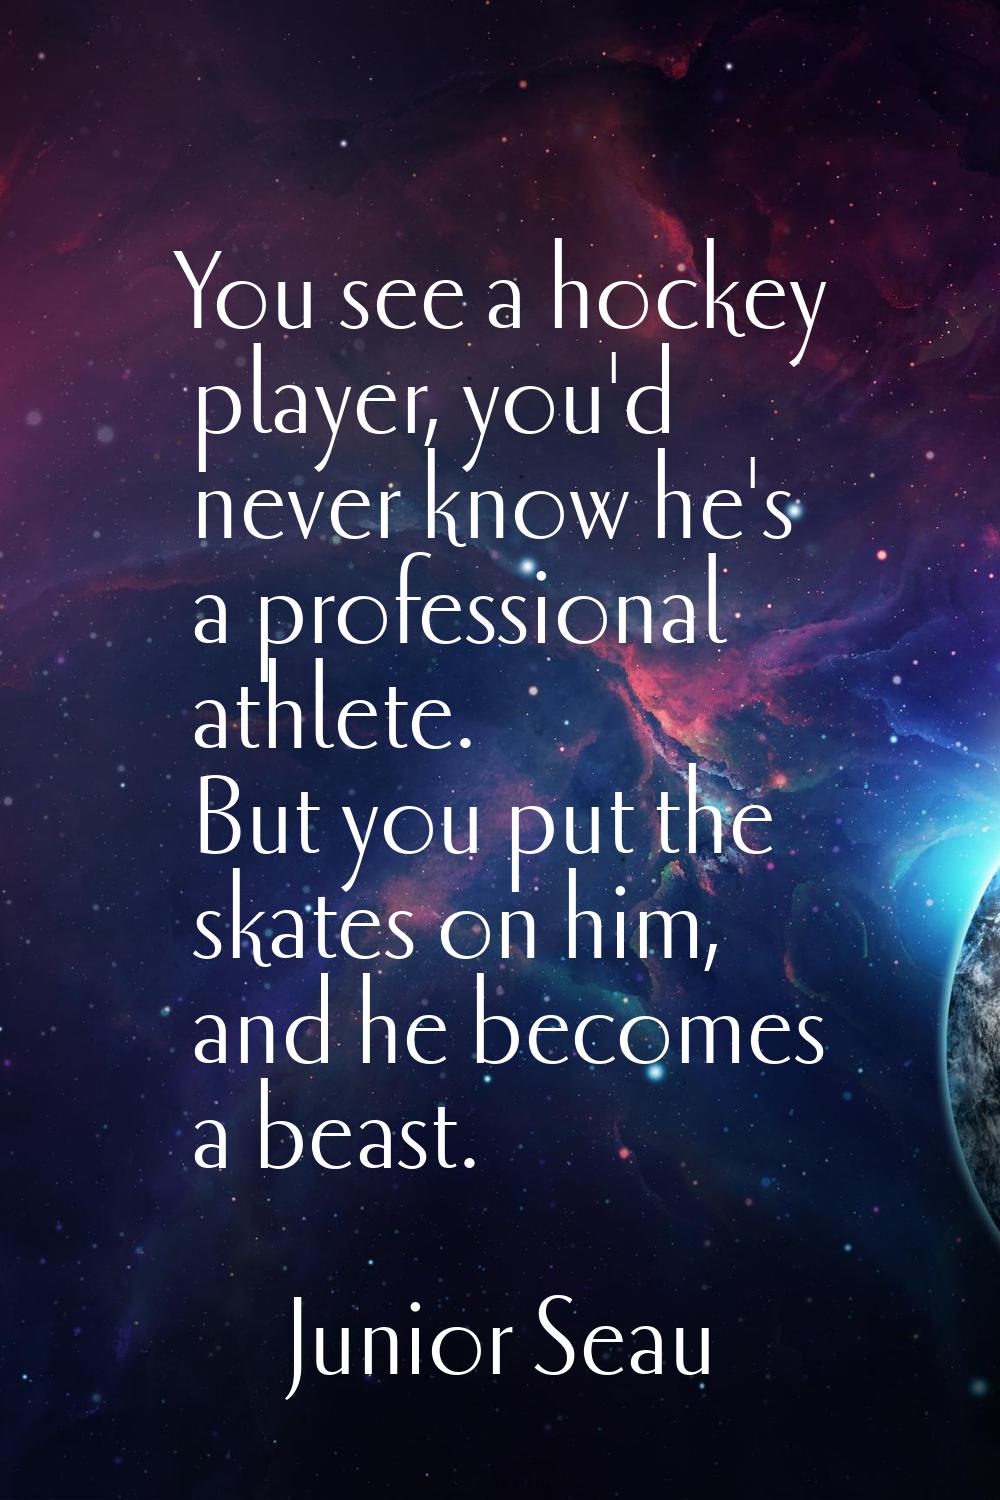 You see a hockey player, you'd never know he's a professional athlete. But you put the skates on hi